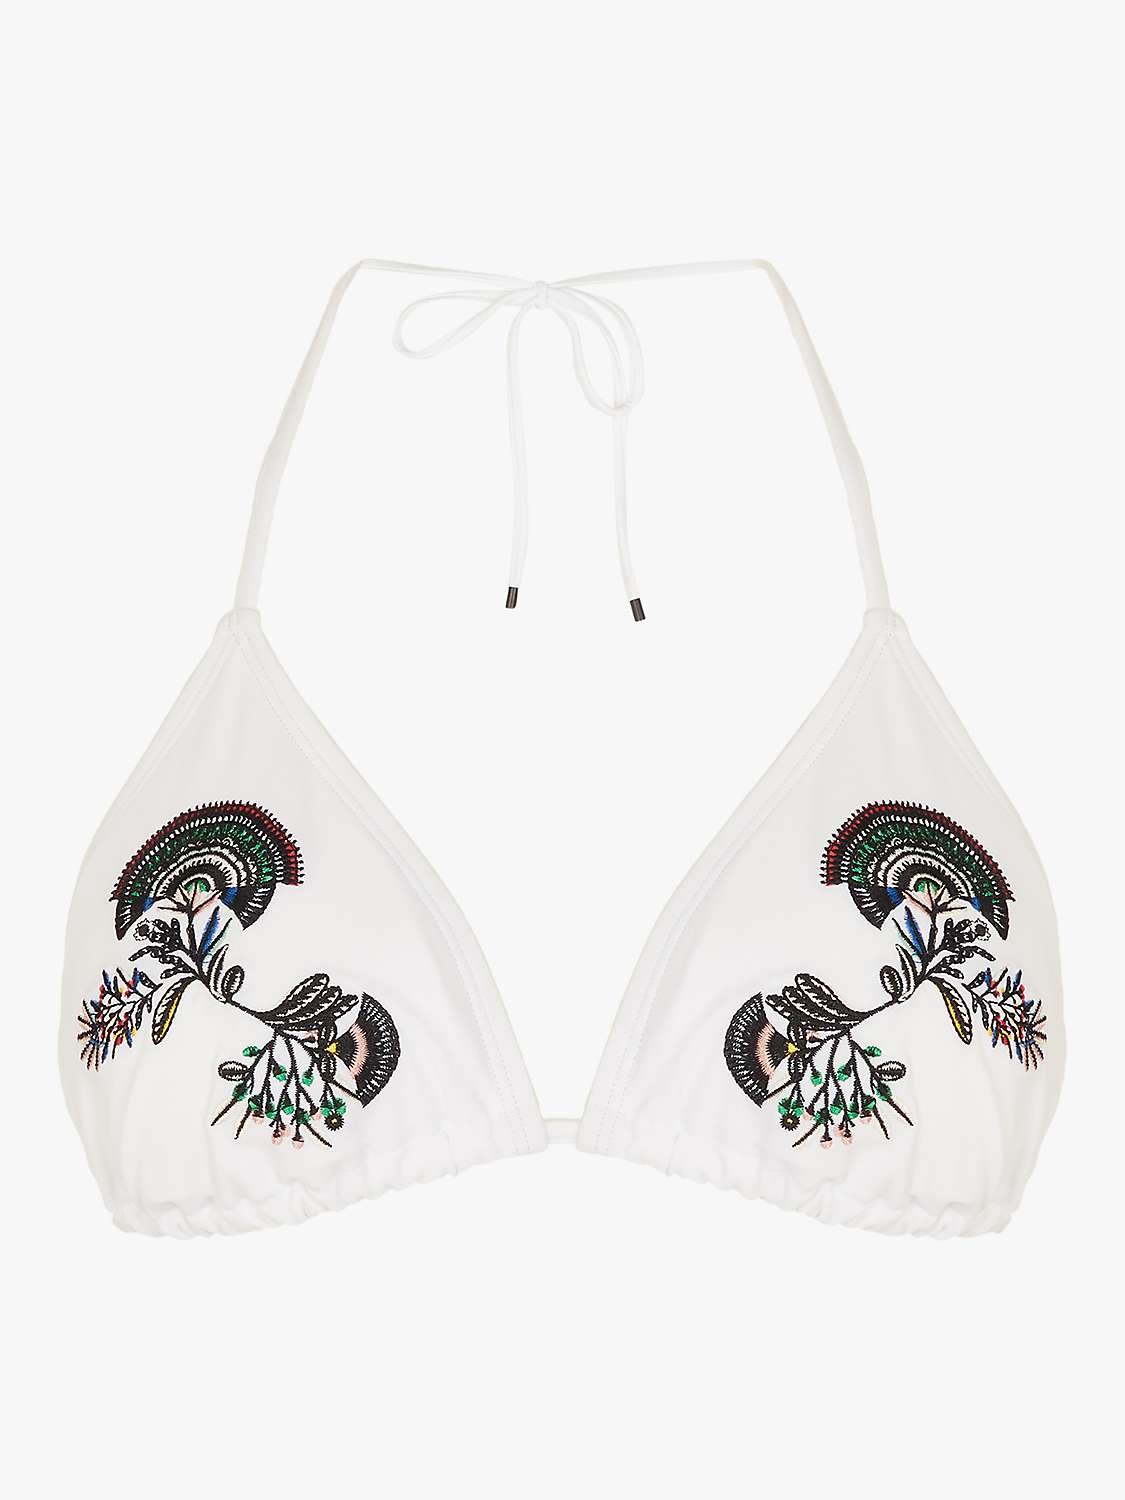 Buy Accessorize Embroidered Fan Triangle Bikini Top, White Online at johnlewis.com